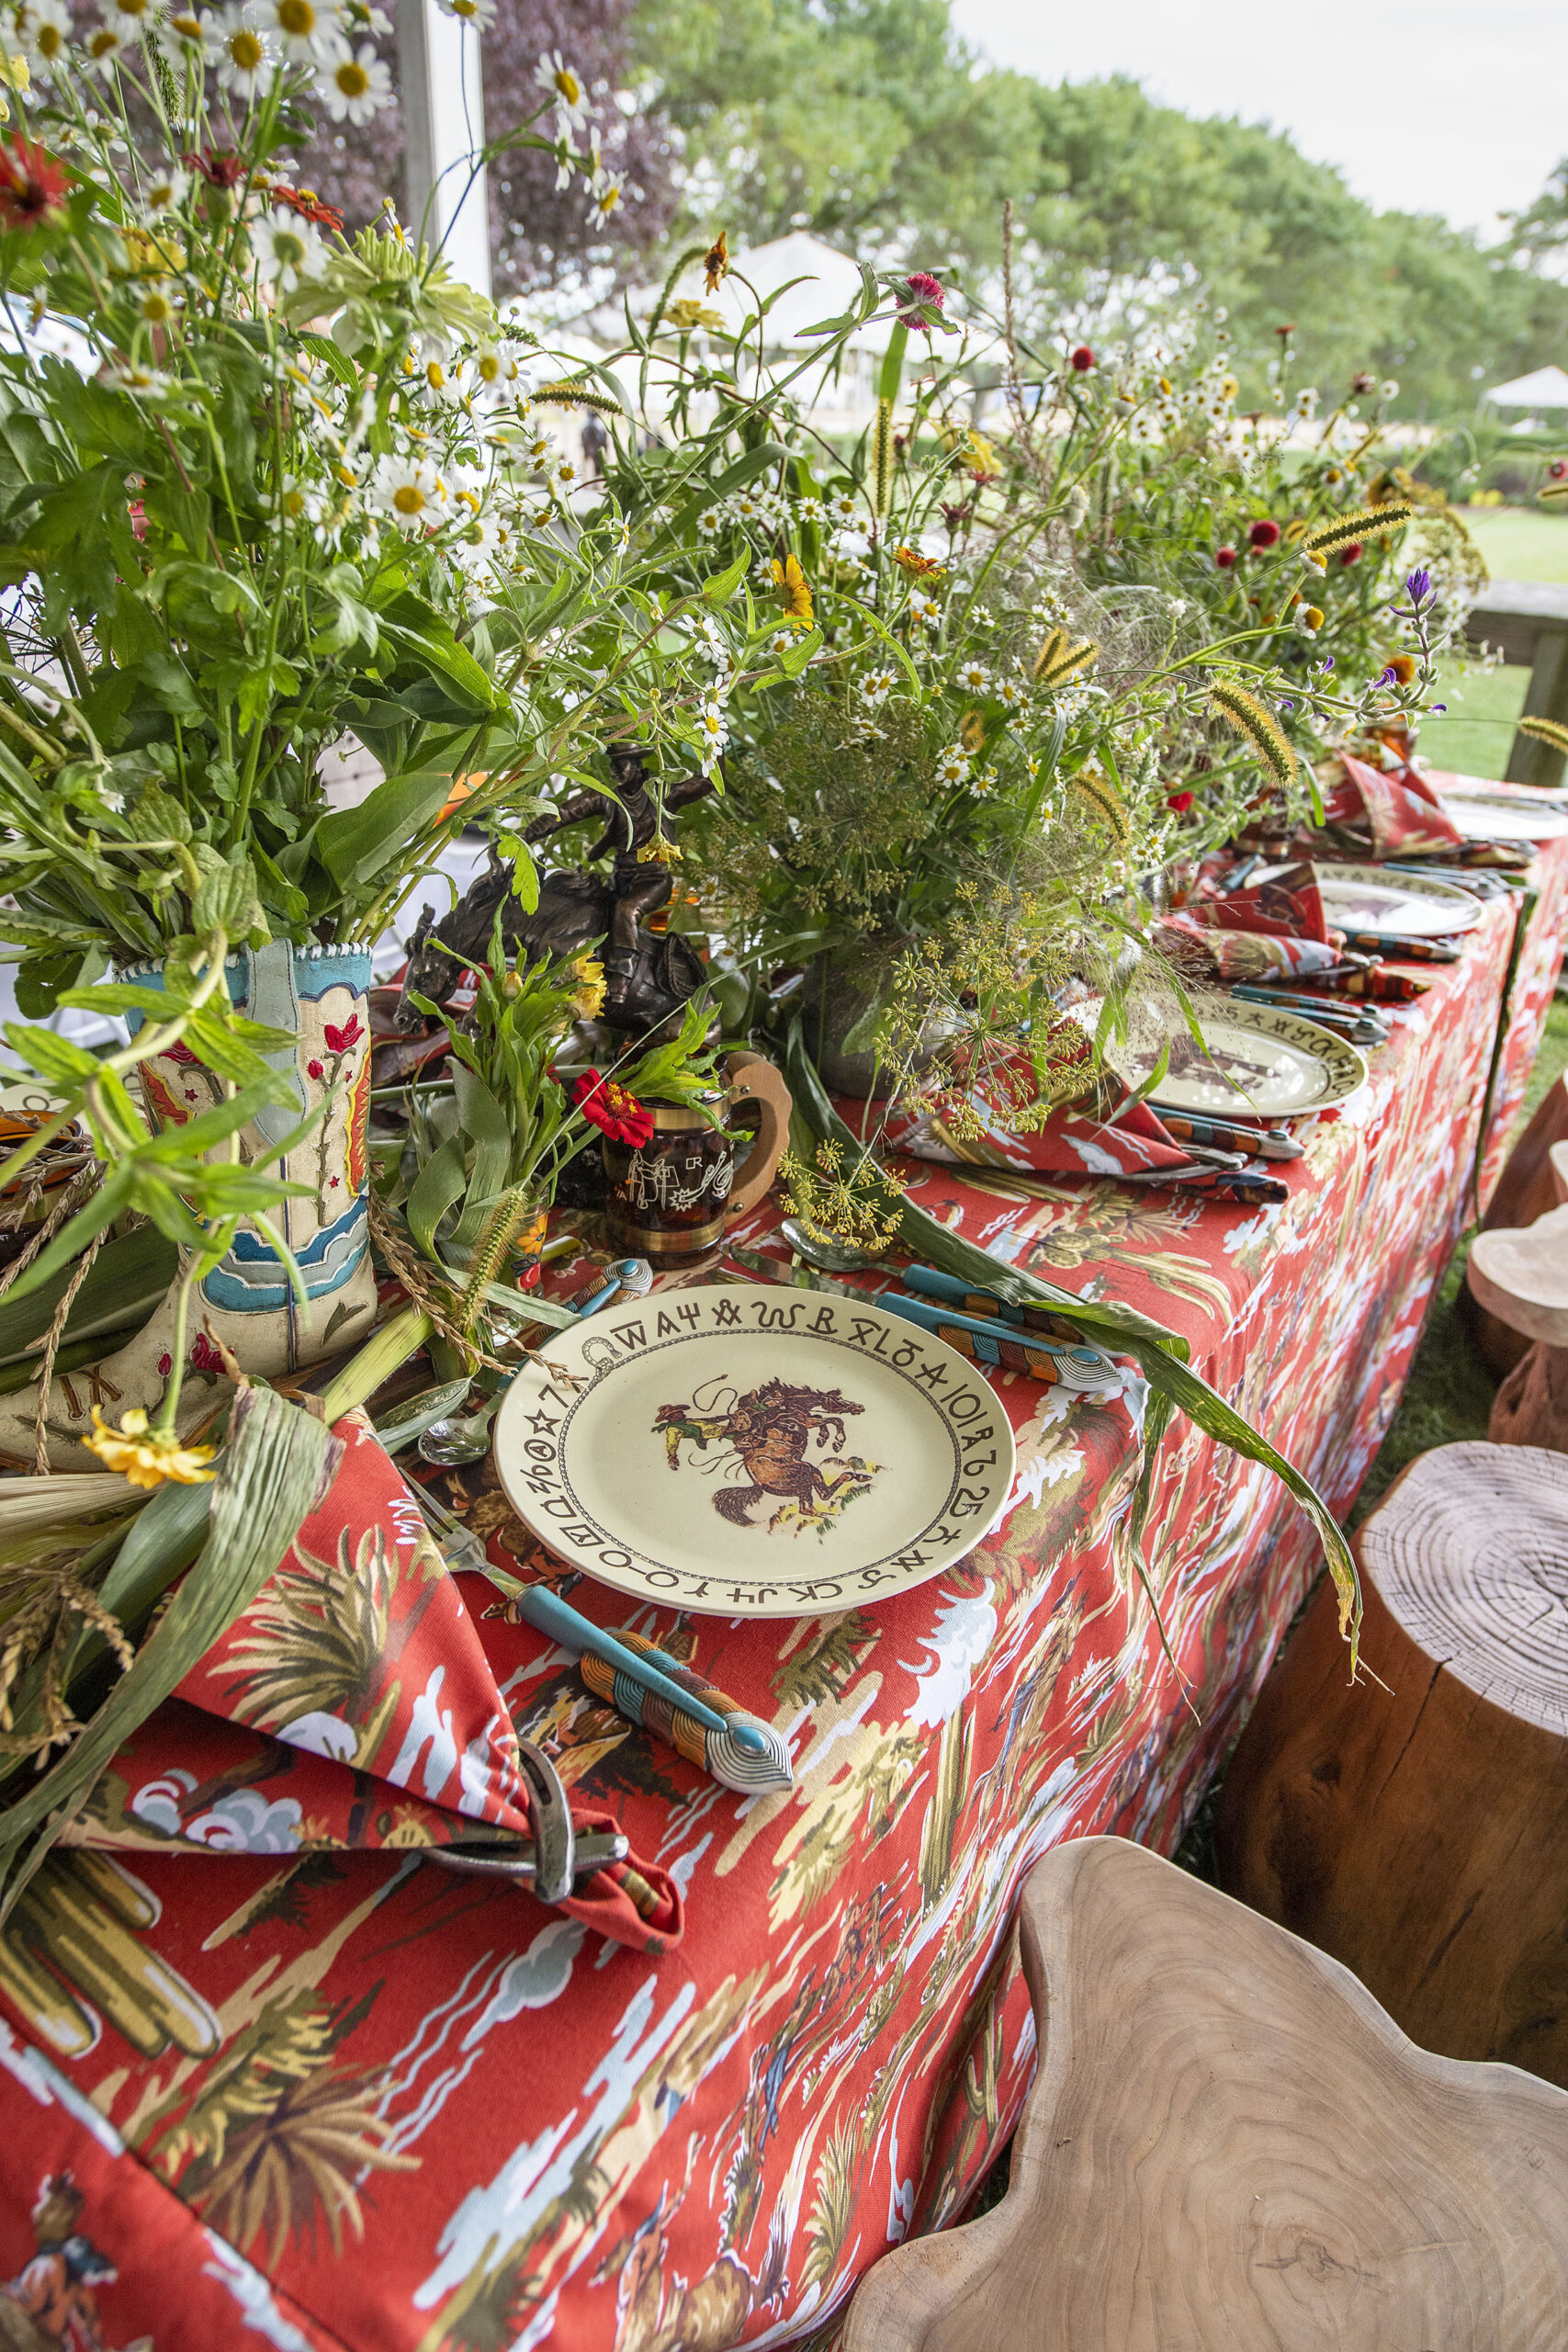 The table setting for the Bickoff Equestrian table in the VIP tent at the 2021 Hampton Classic on Grand Prix Sunday, September 5th, 2021